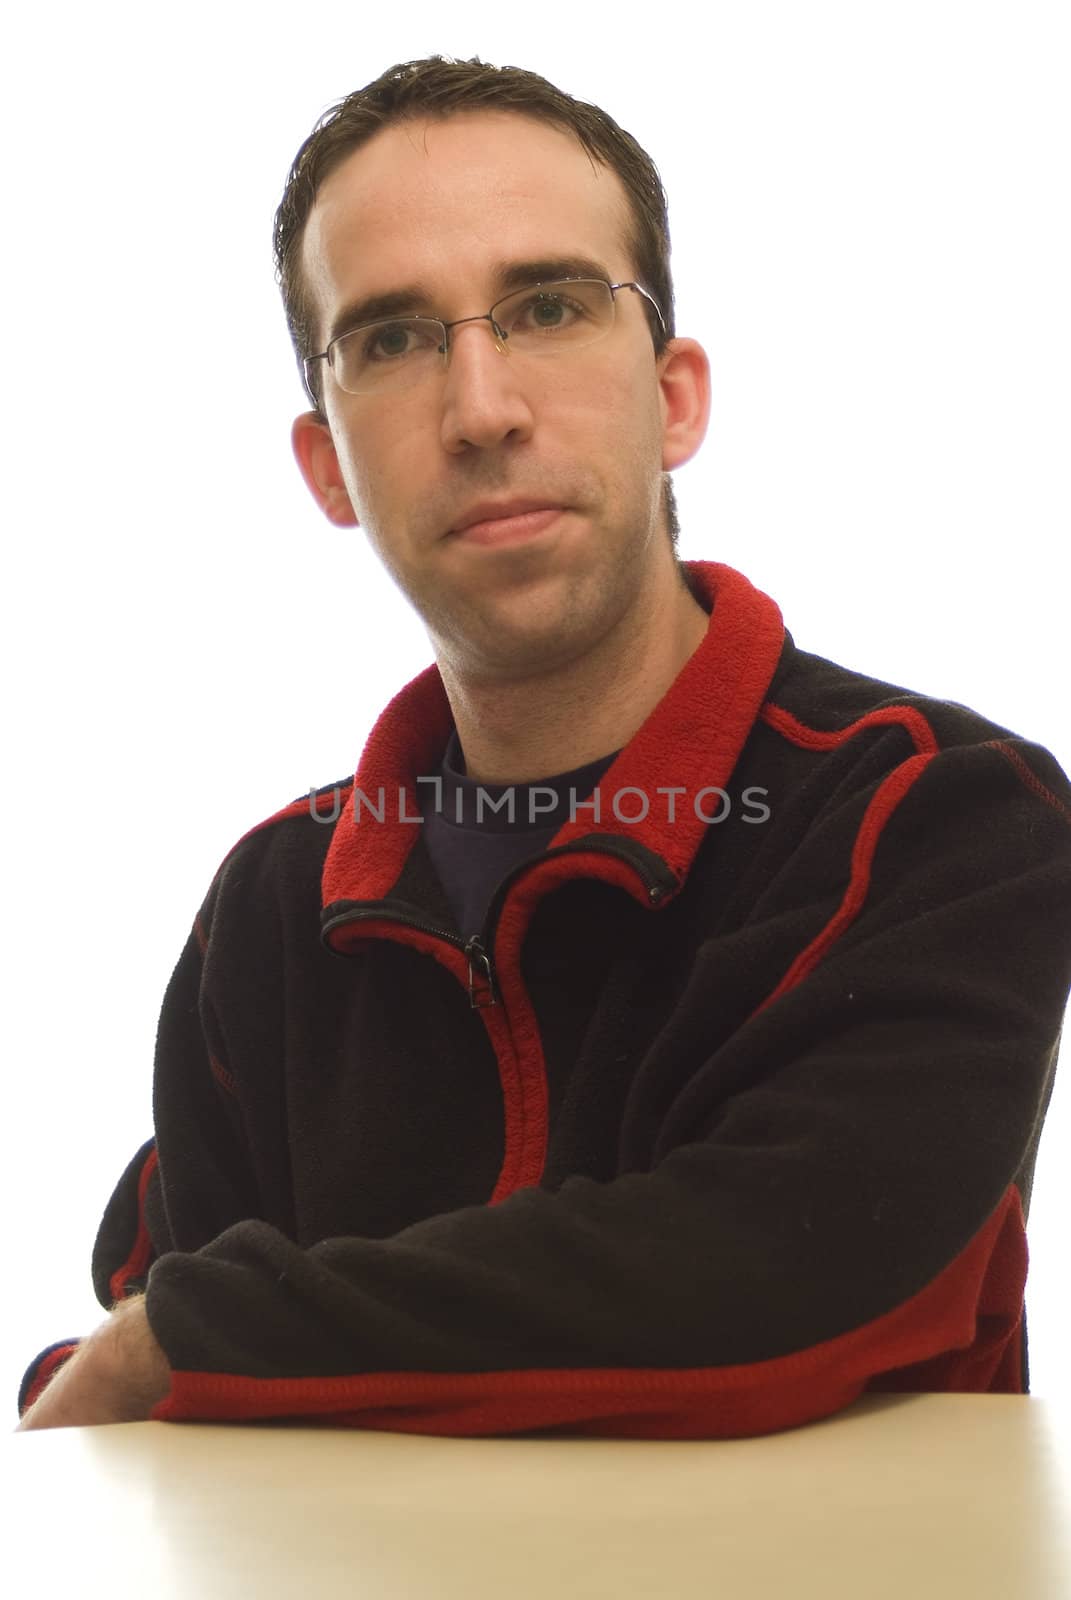 A young man wearing a black sweat shirt with red trim, leaning on a table.